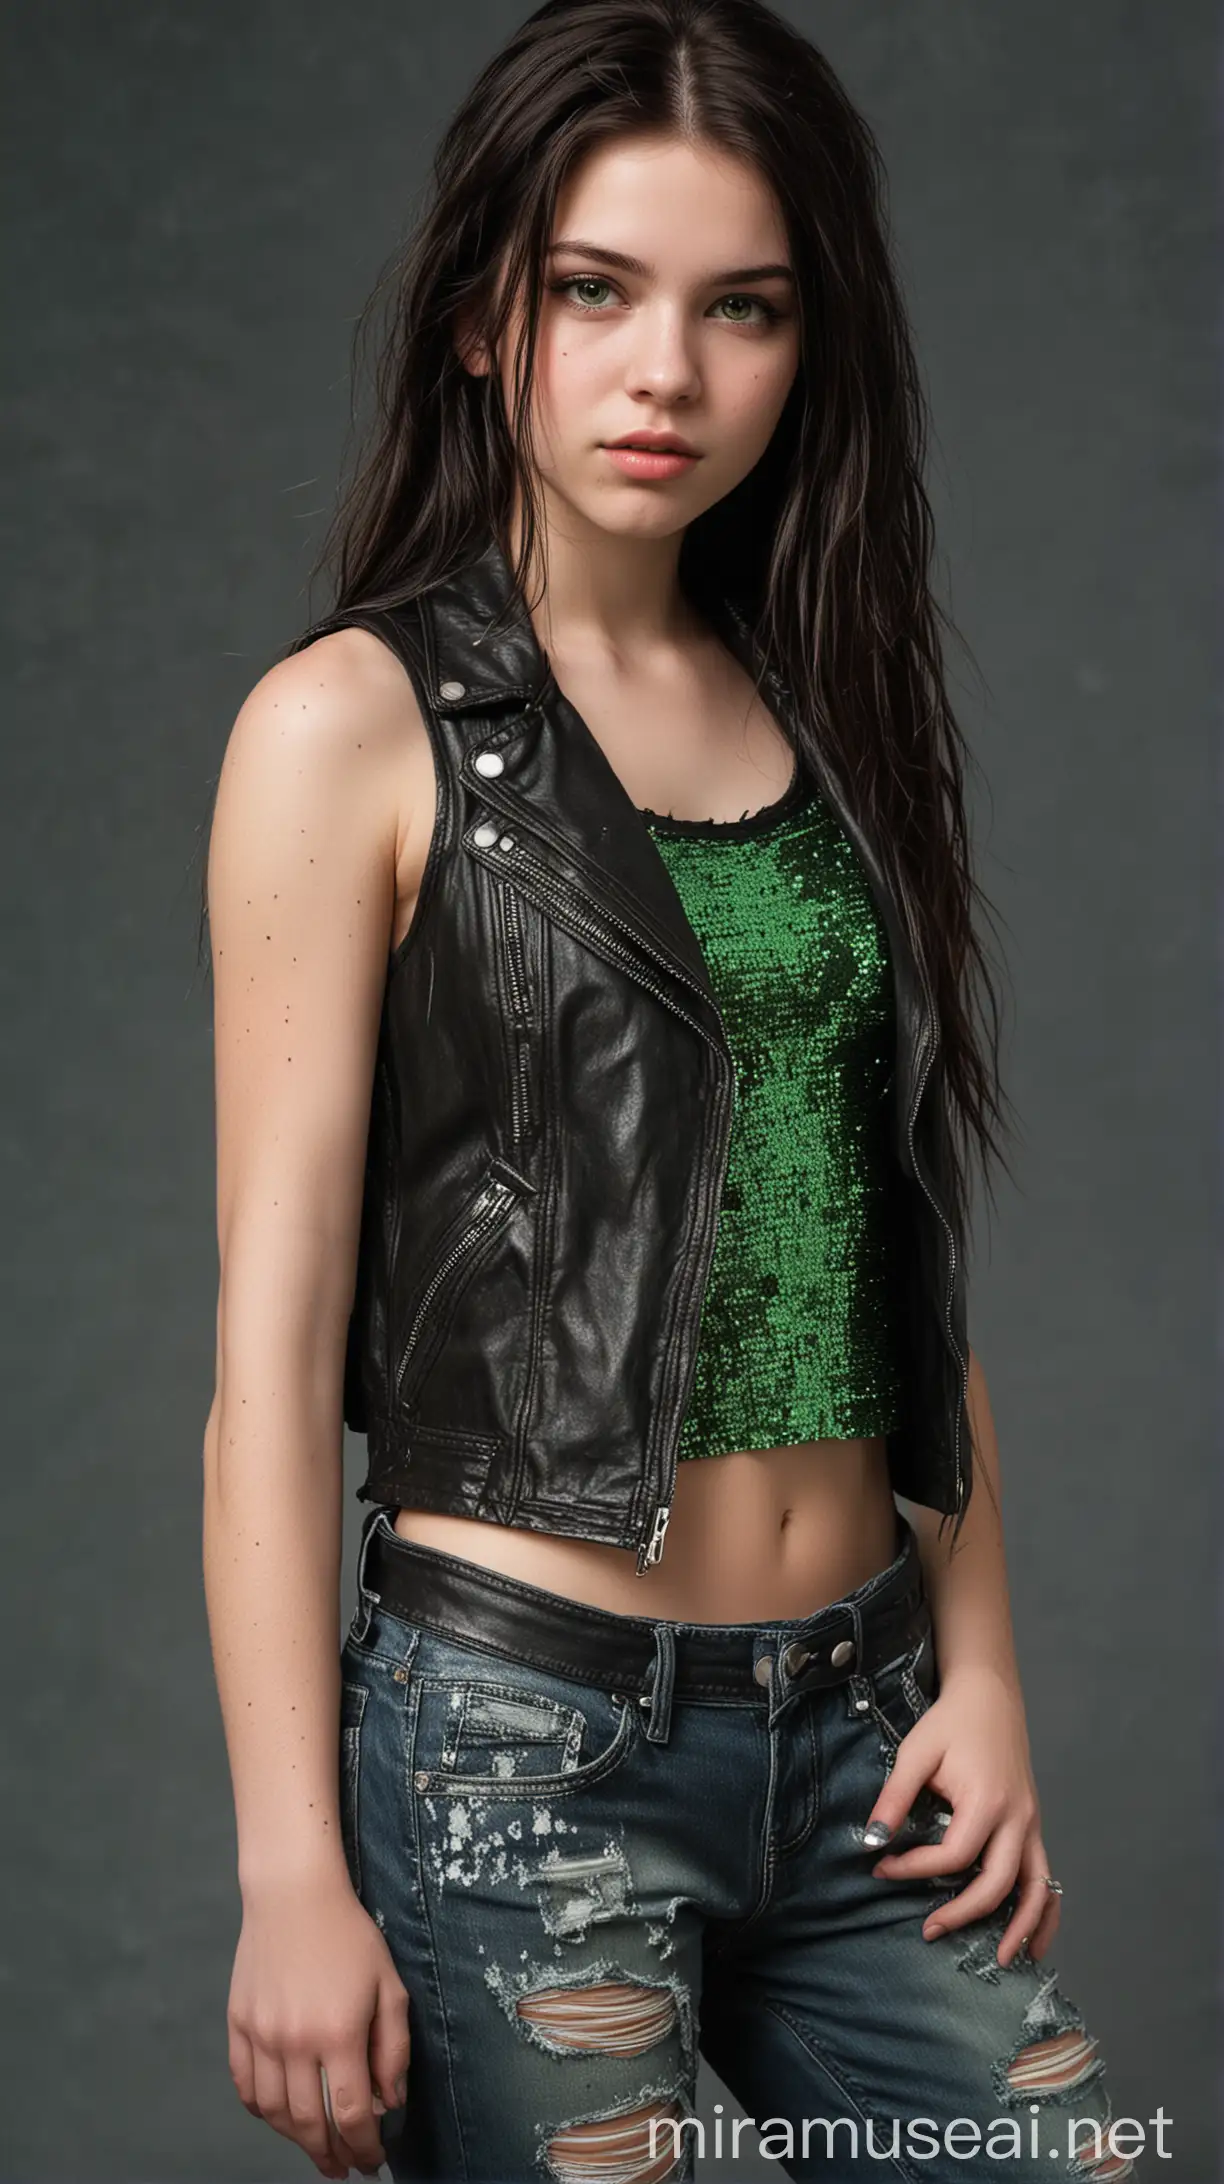 Calm and Distrustful Teenage Girl in Green Sequin Tank Top and Leather Jacket